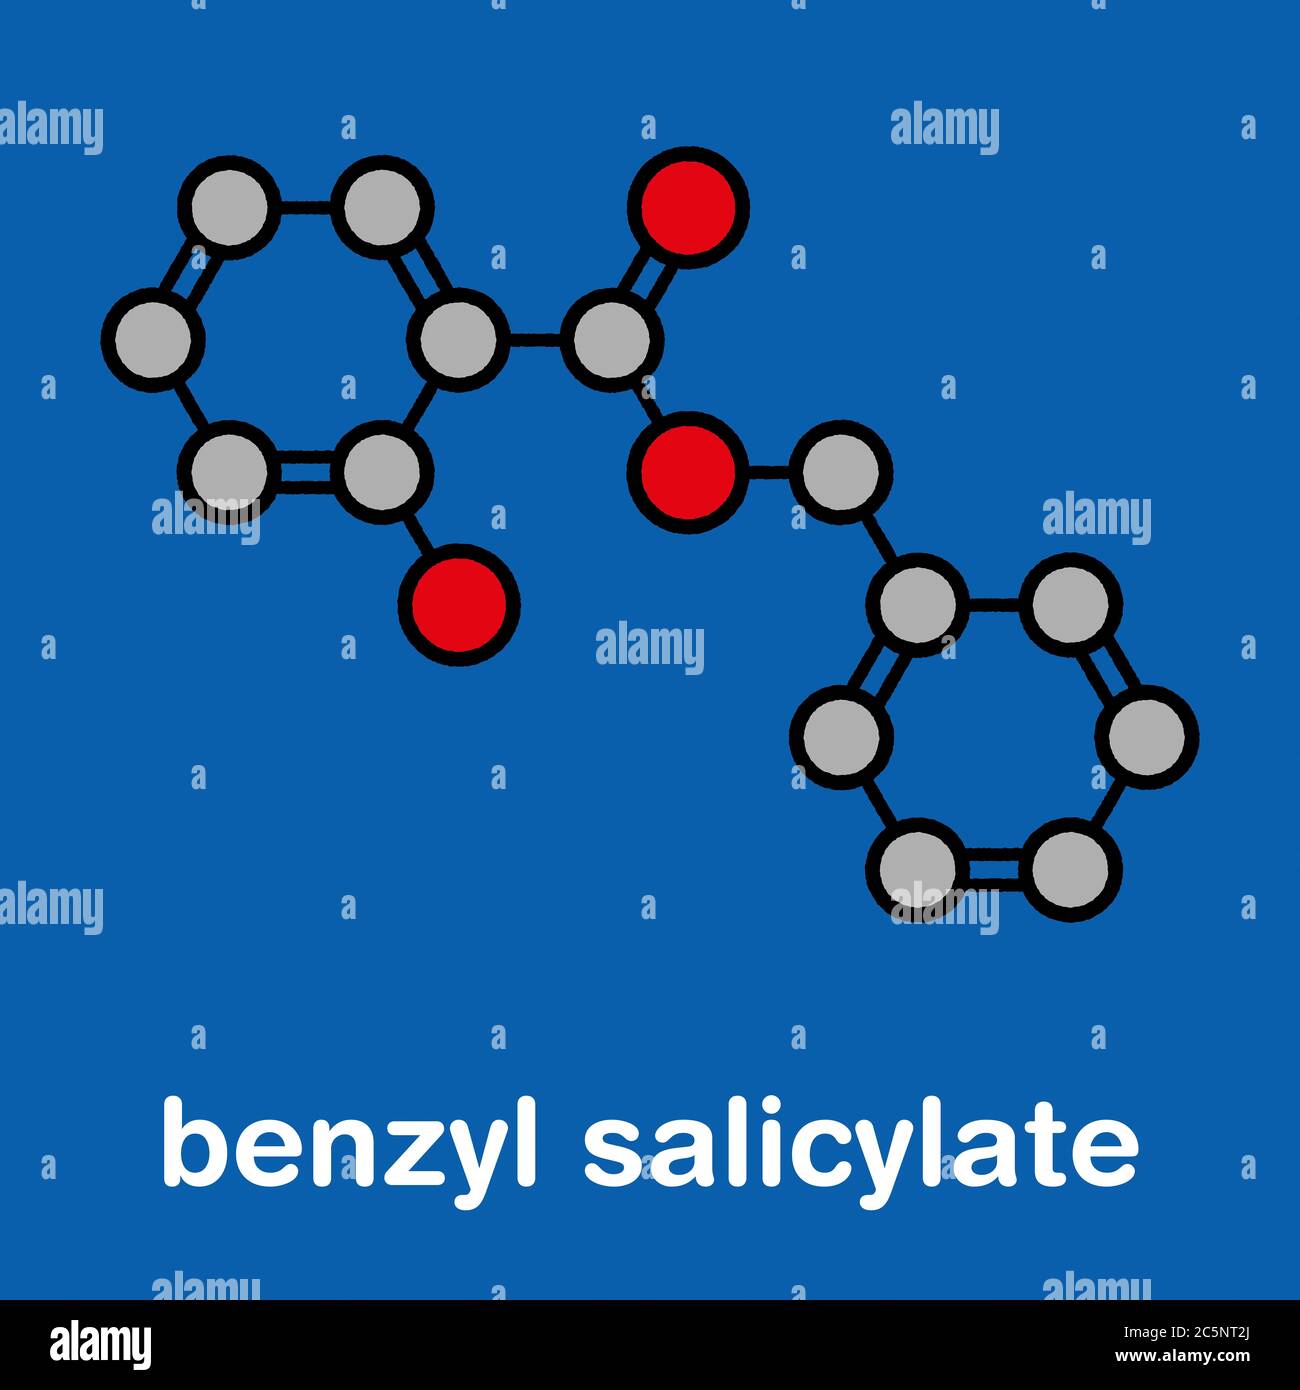 Benzyl salicylate (benzyl 4-hydroxybenzoate) molecule. Used in cosmetics and perfumes. Stylized skeletal formula (chemical structure): Atoms are shown as color-coded circles: hydrogen (hidden), carbon (grey), oxygen (red). Stock Photo